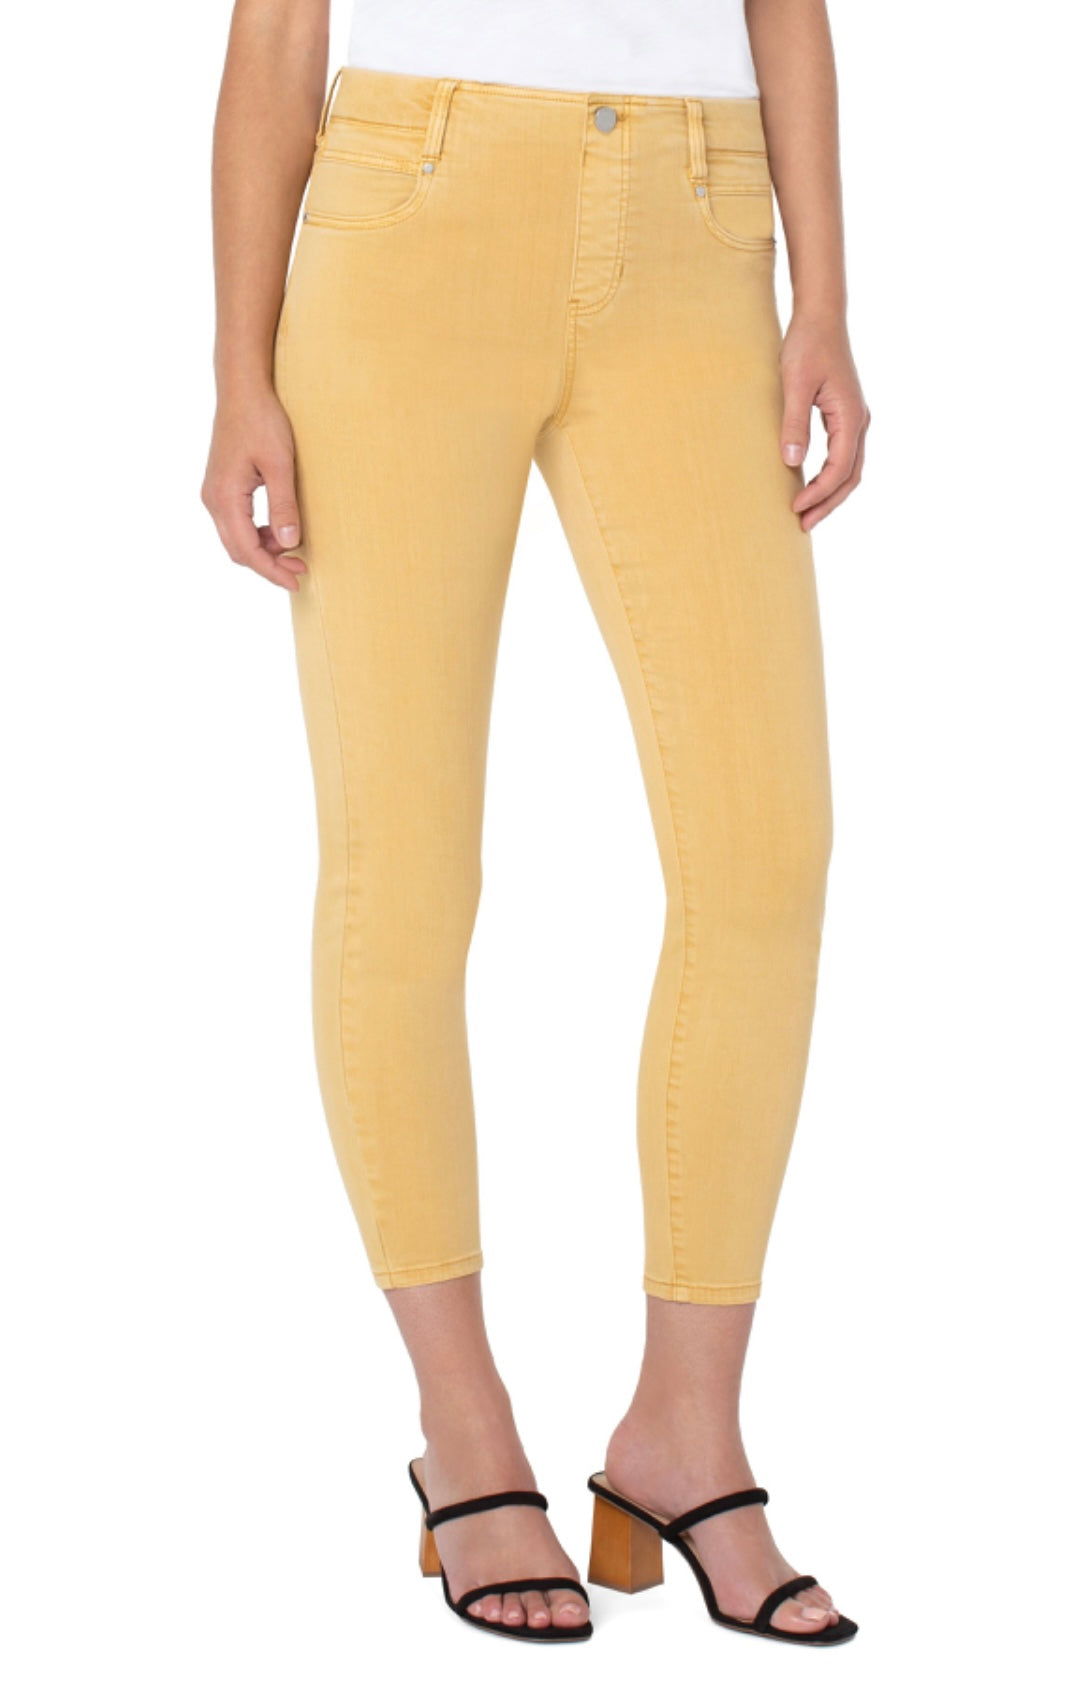 The Gia Glider Crop Skinny in Golden Glow